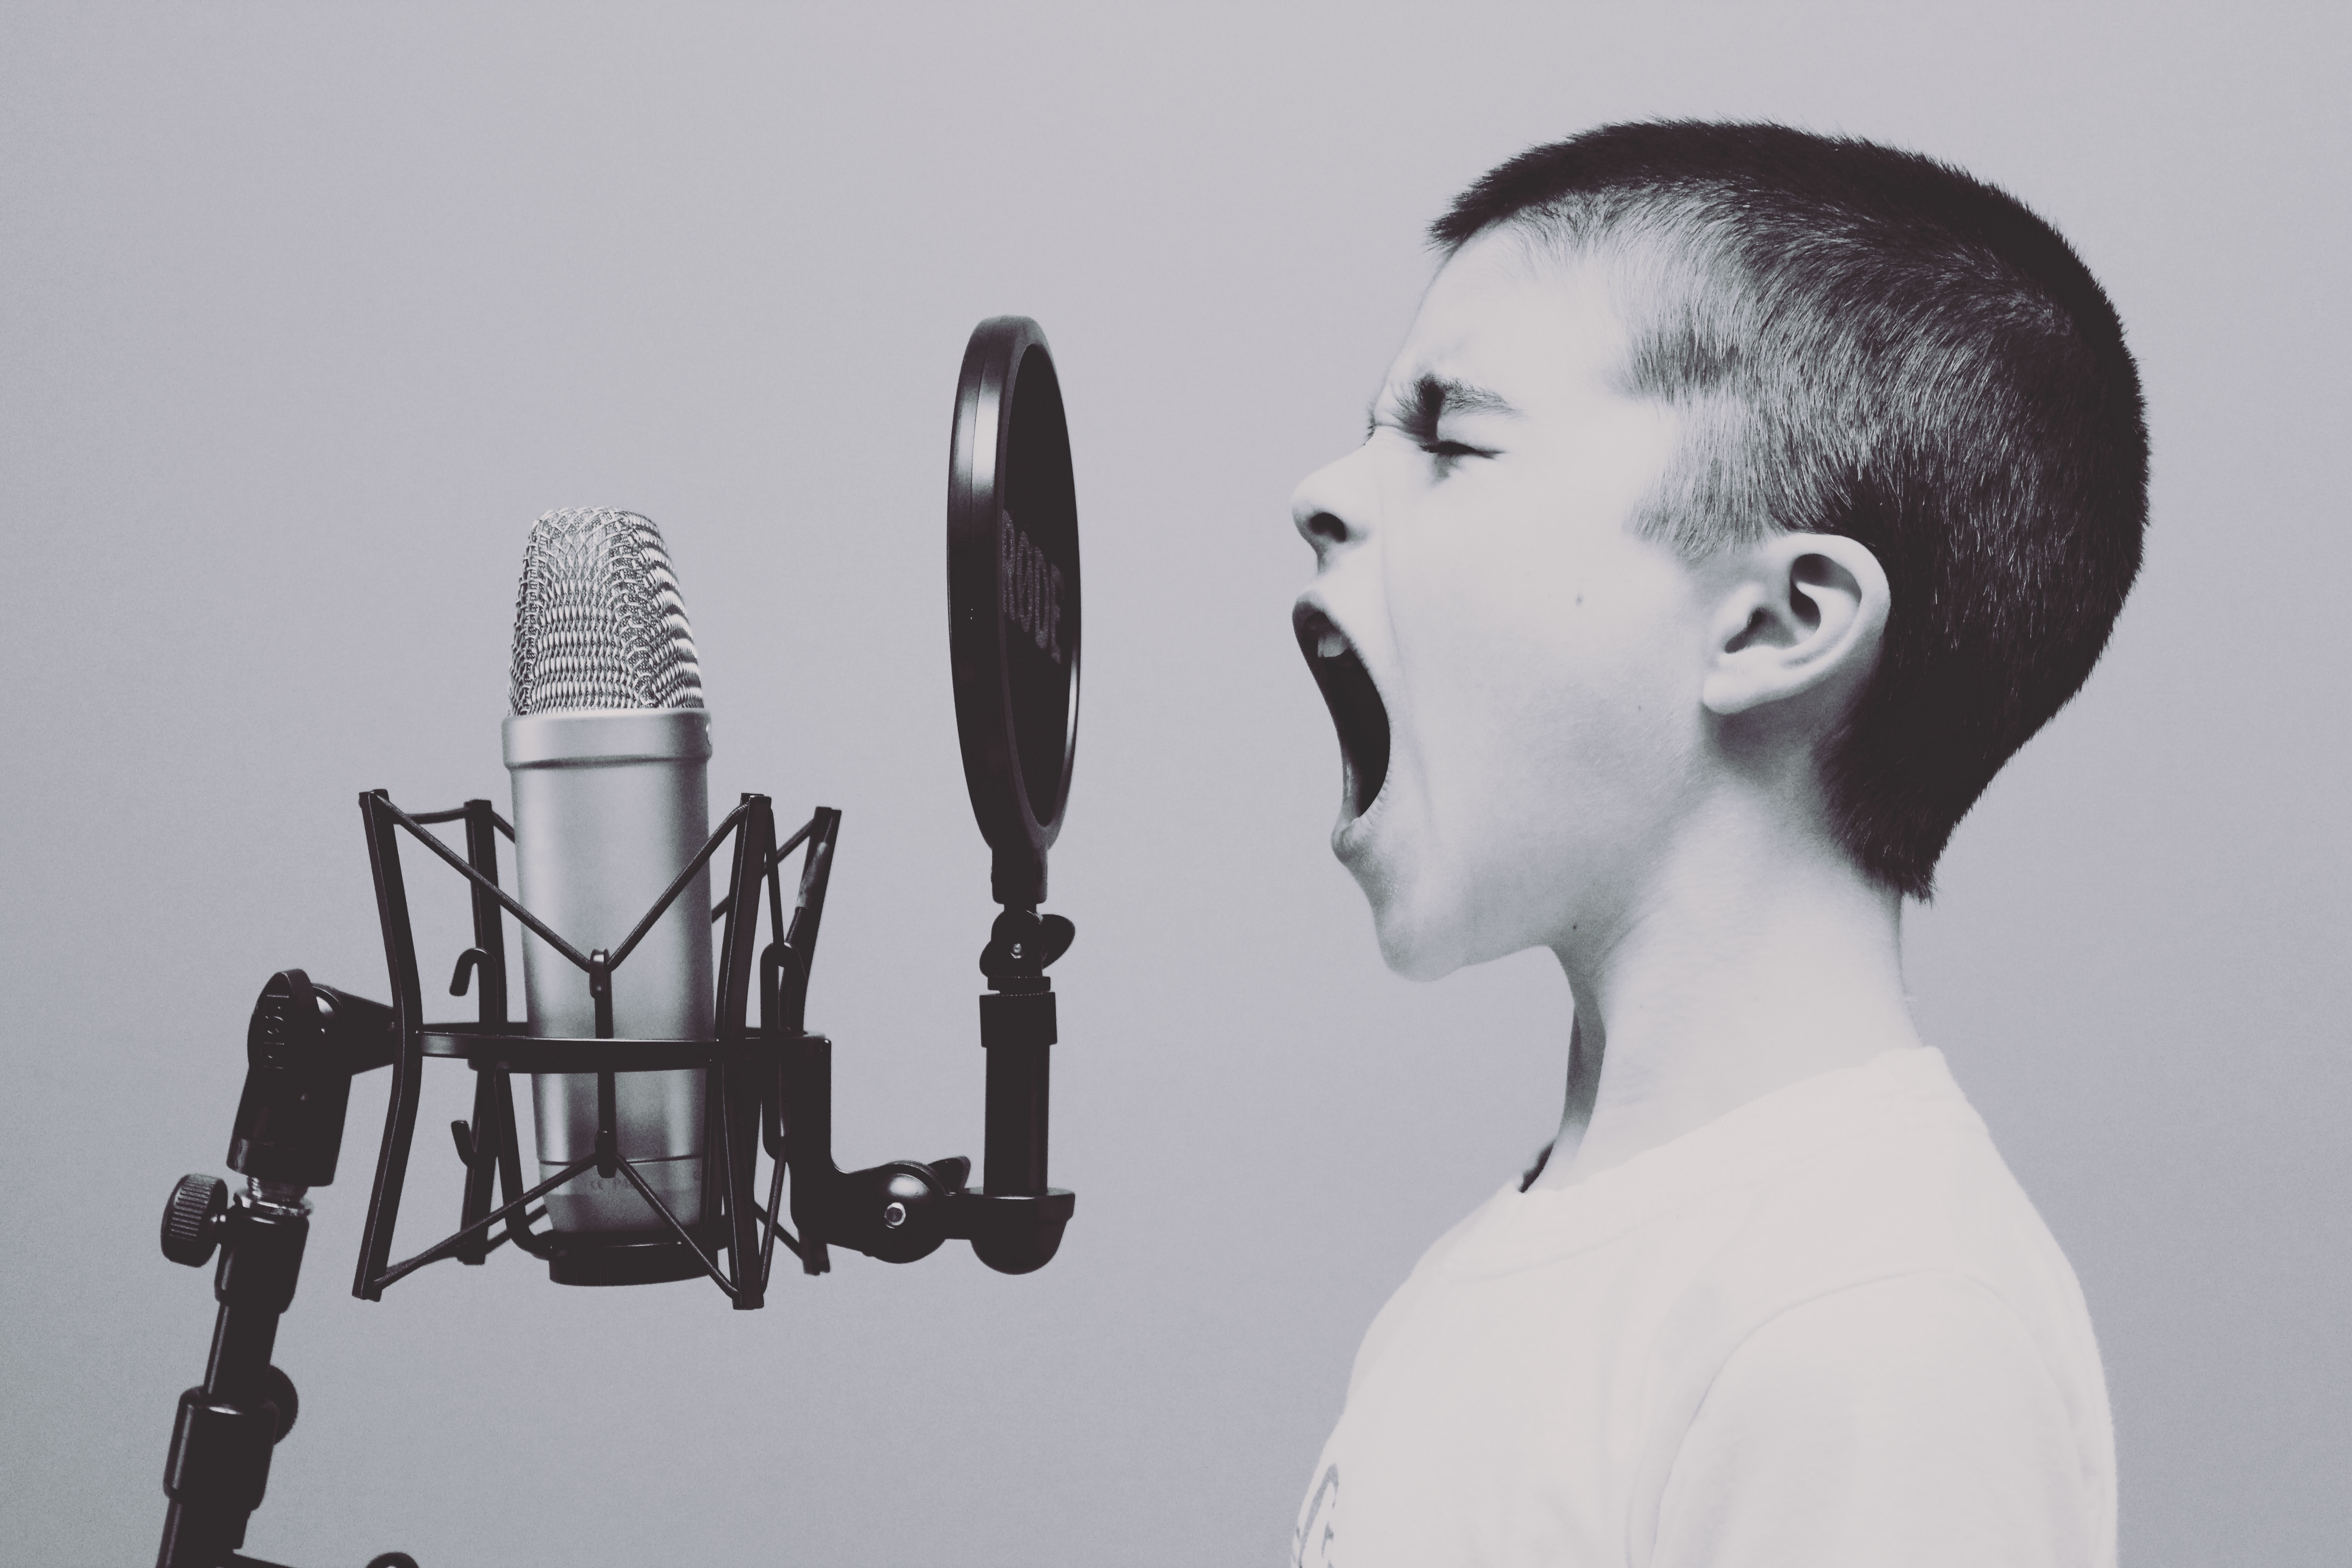 A child is screaming in to a microphone